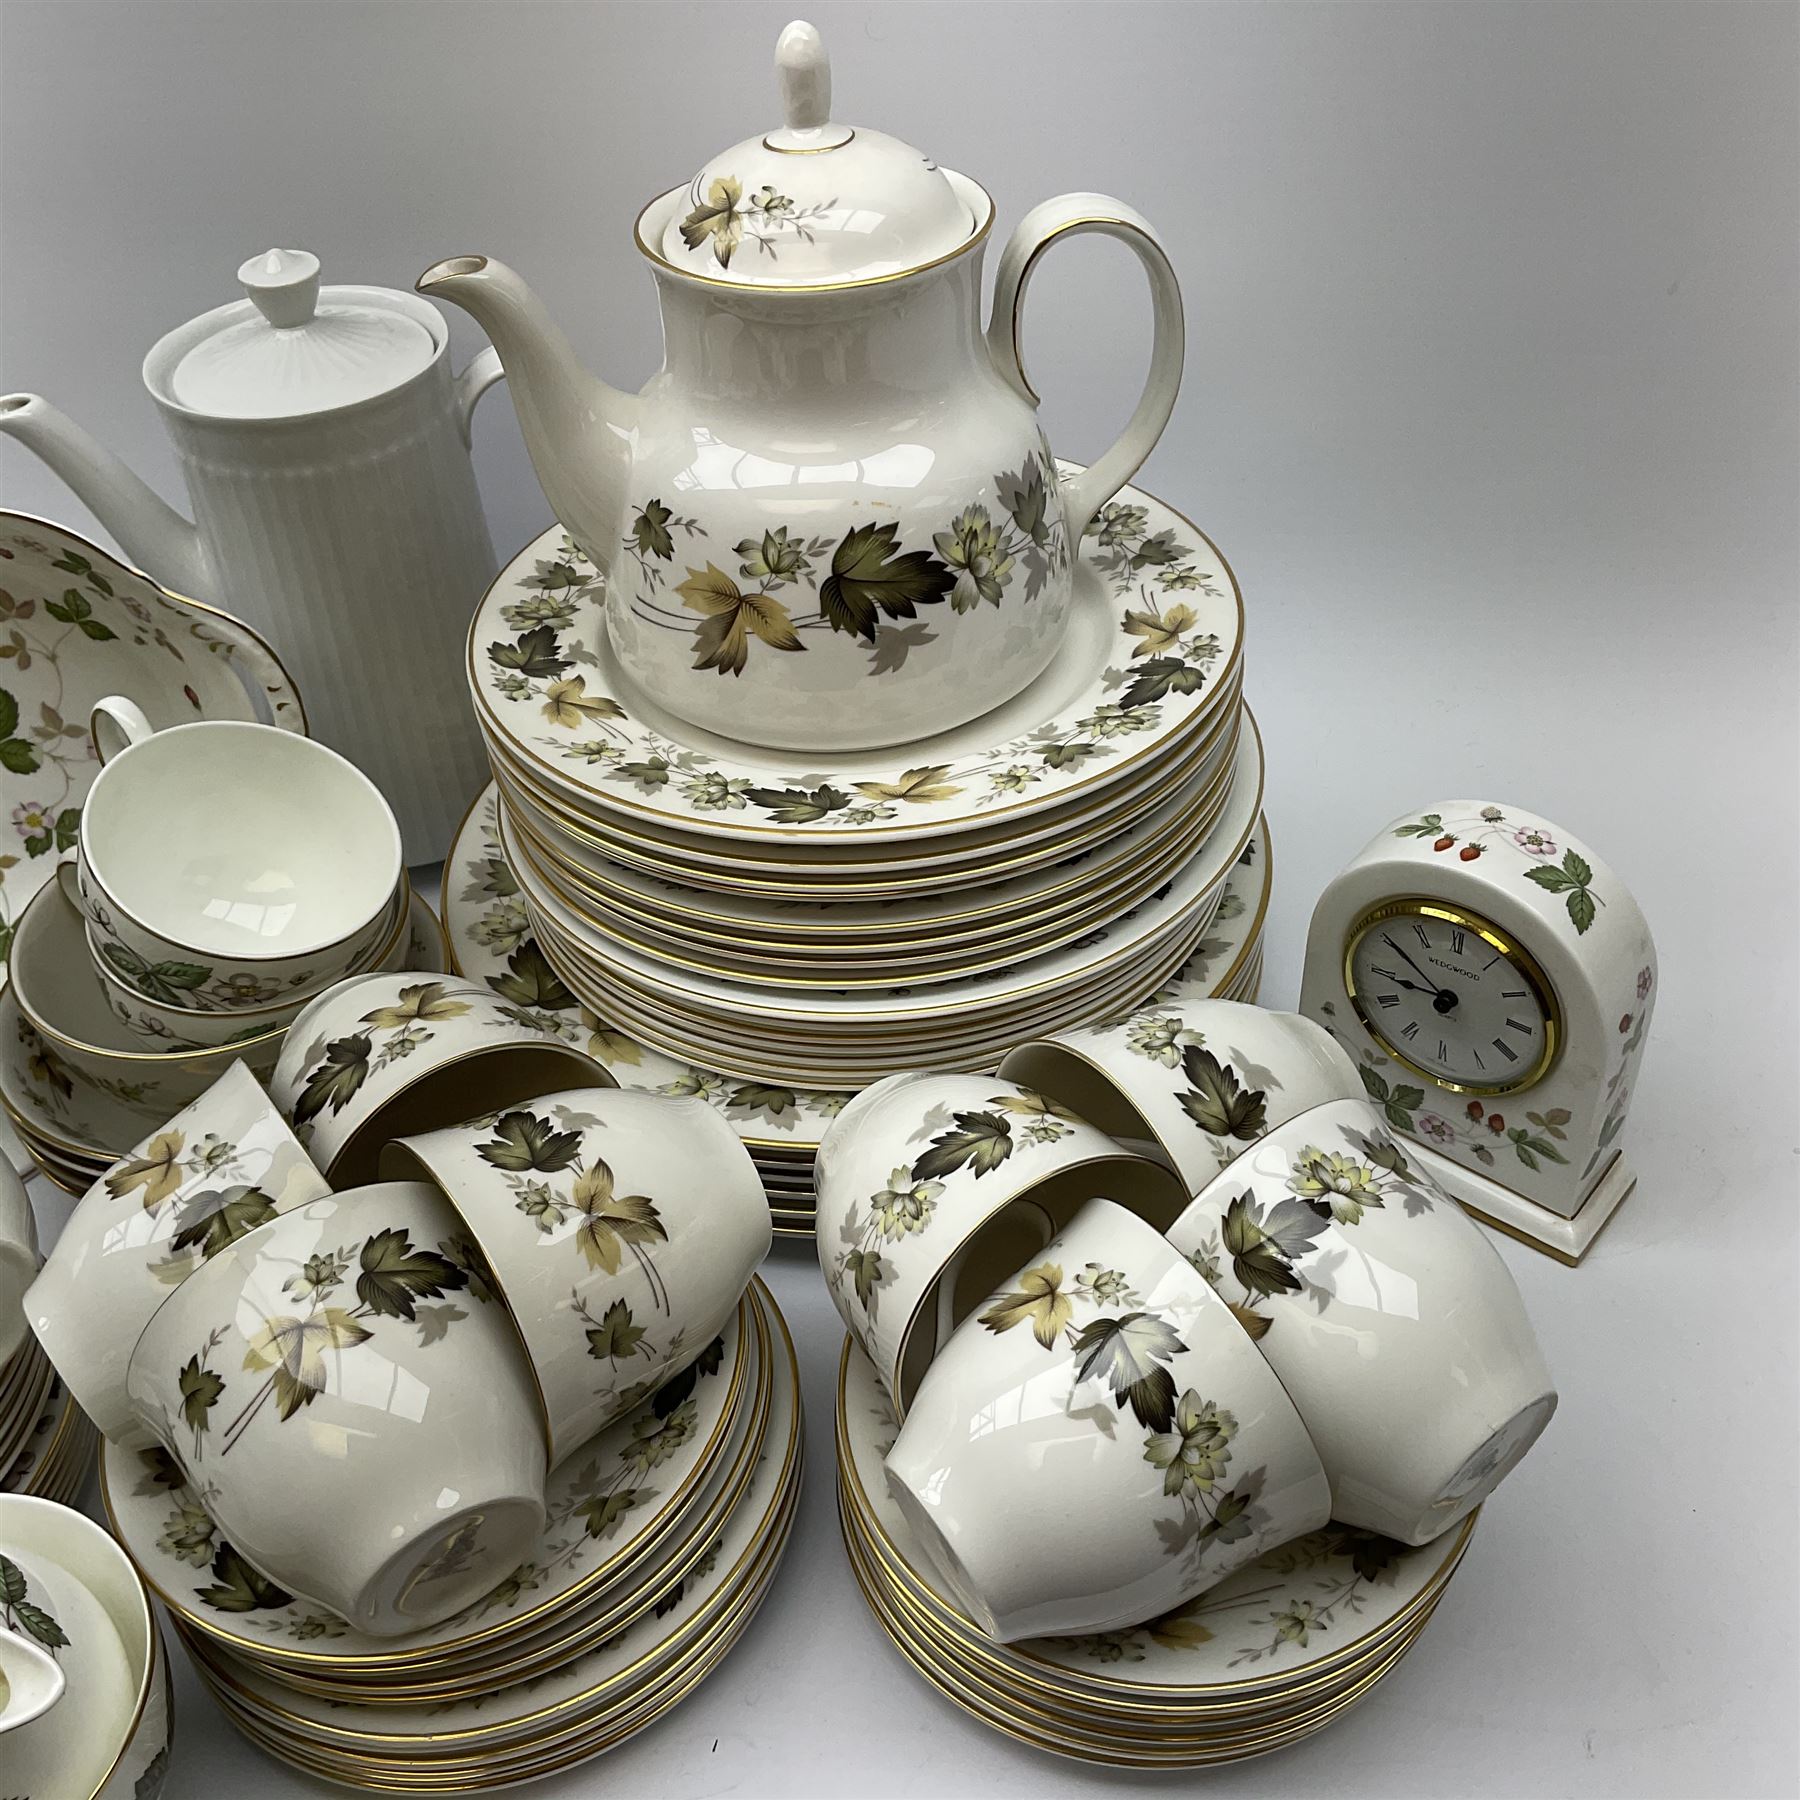 Royal Doulton Larchmont pattern tea and dinner wares - Image 3 of 4